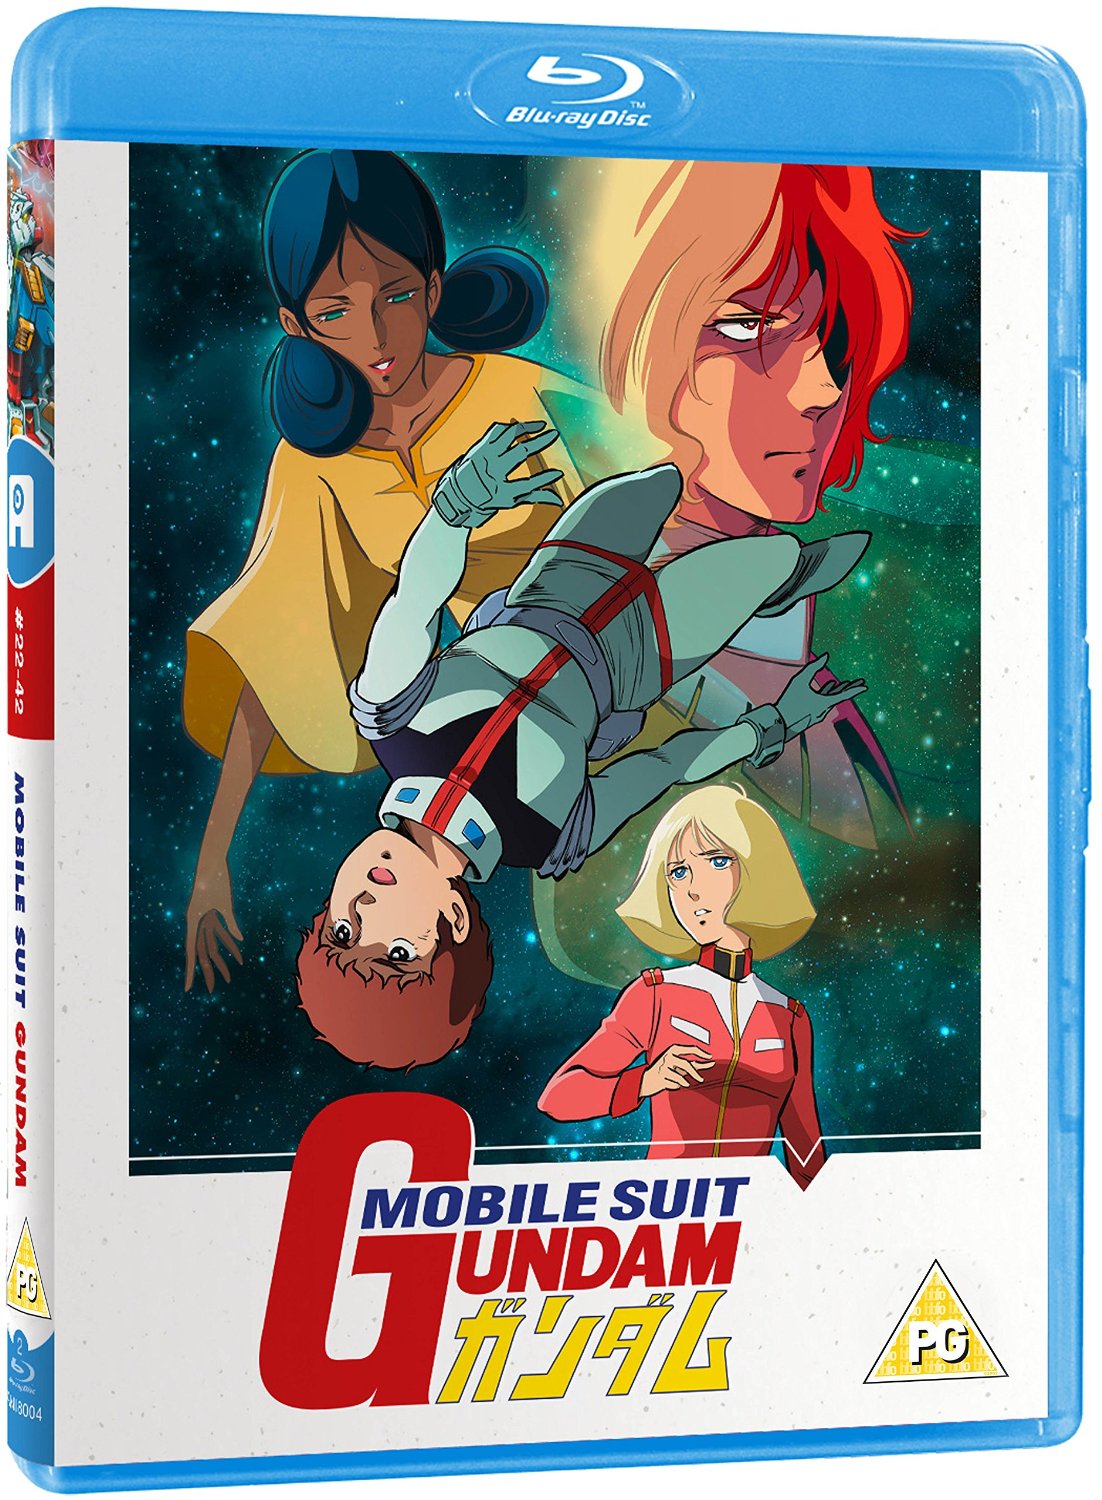  Mobile Suit Gundam Part 2 of 2 Blu-ray (with Limited Edition Art Book)  